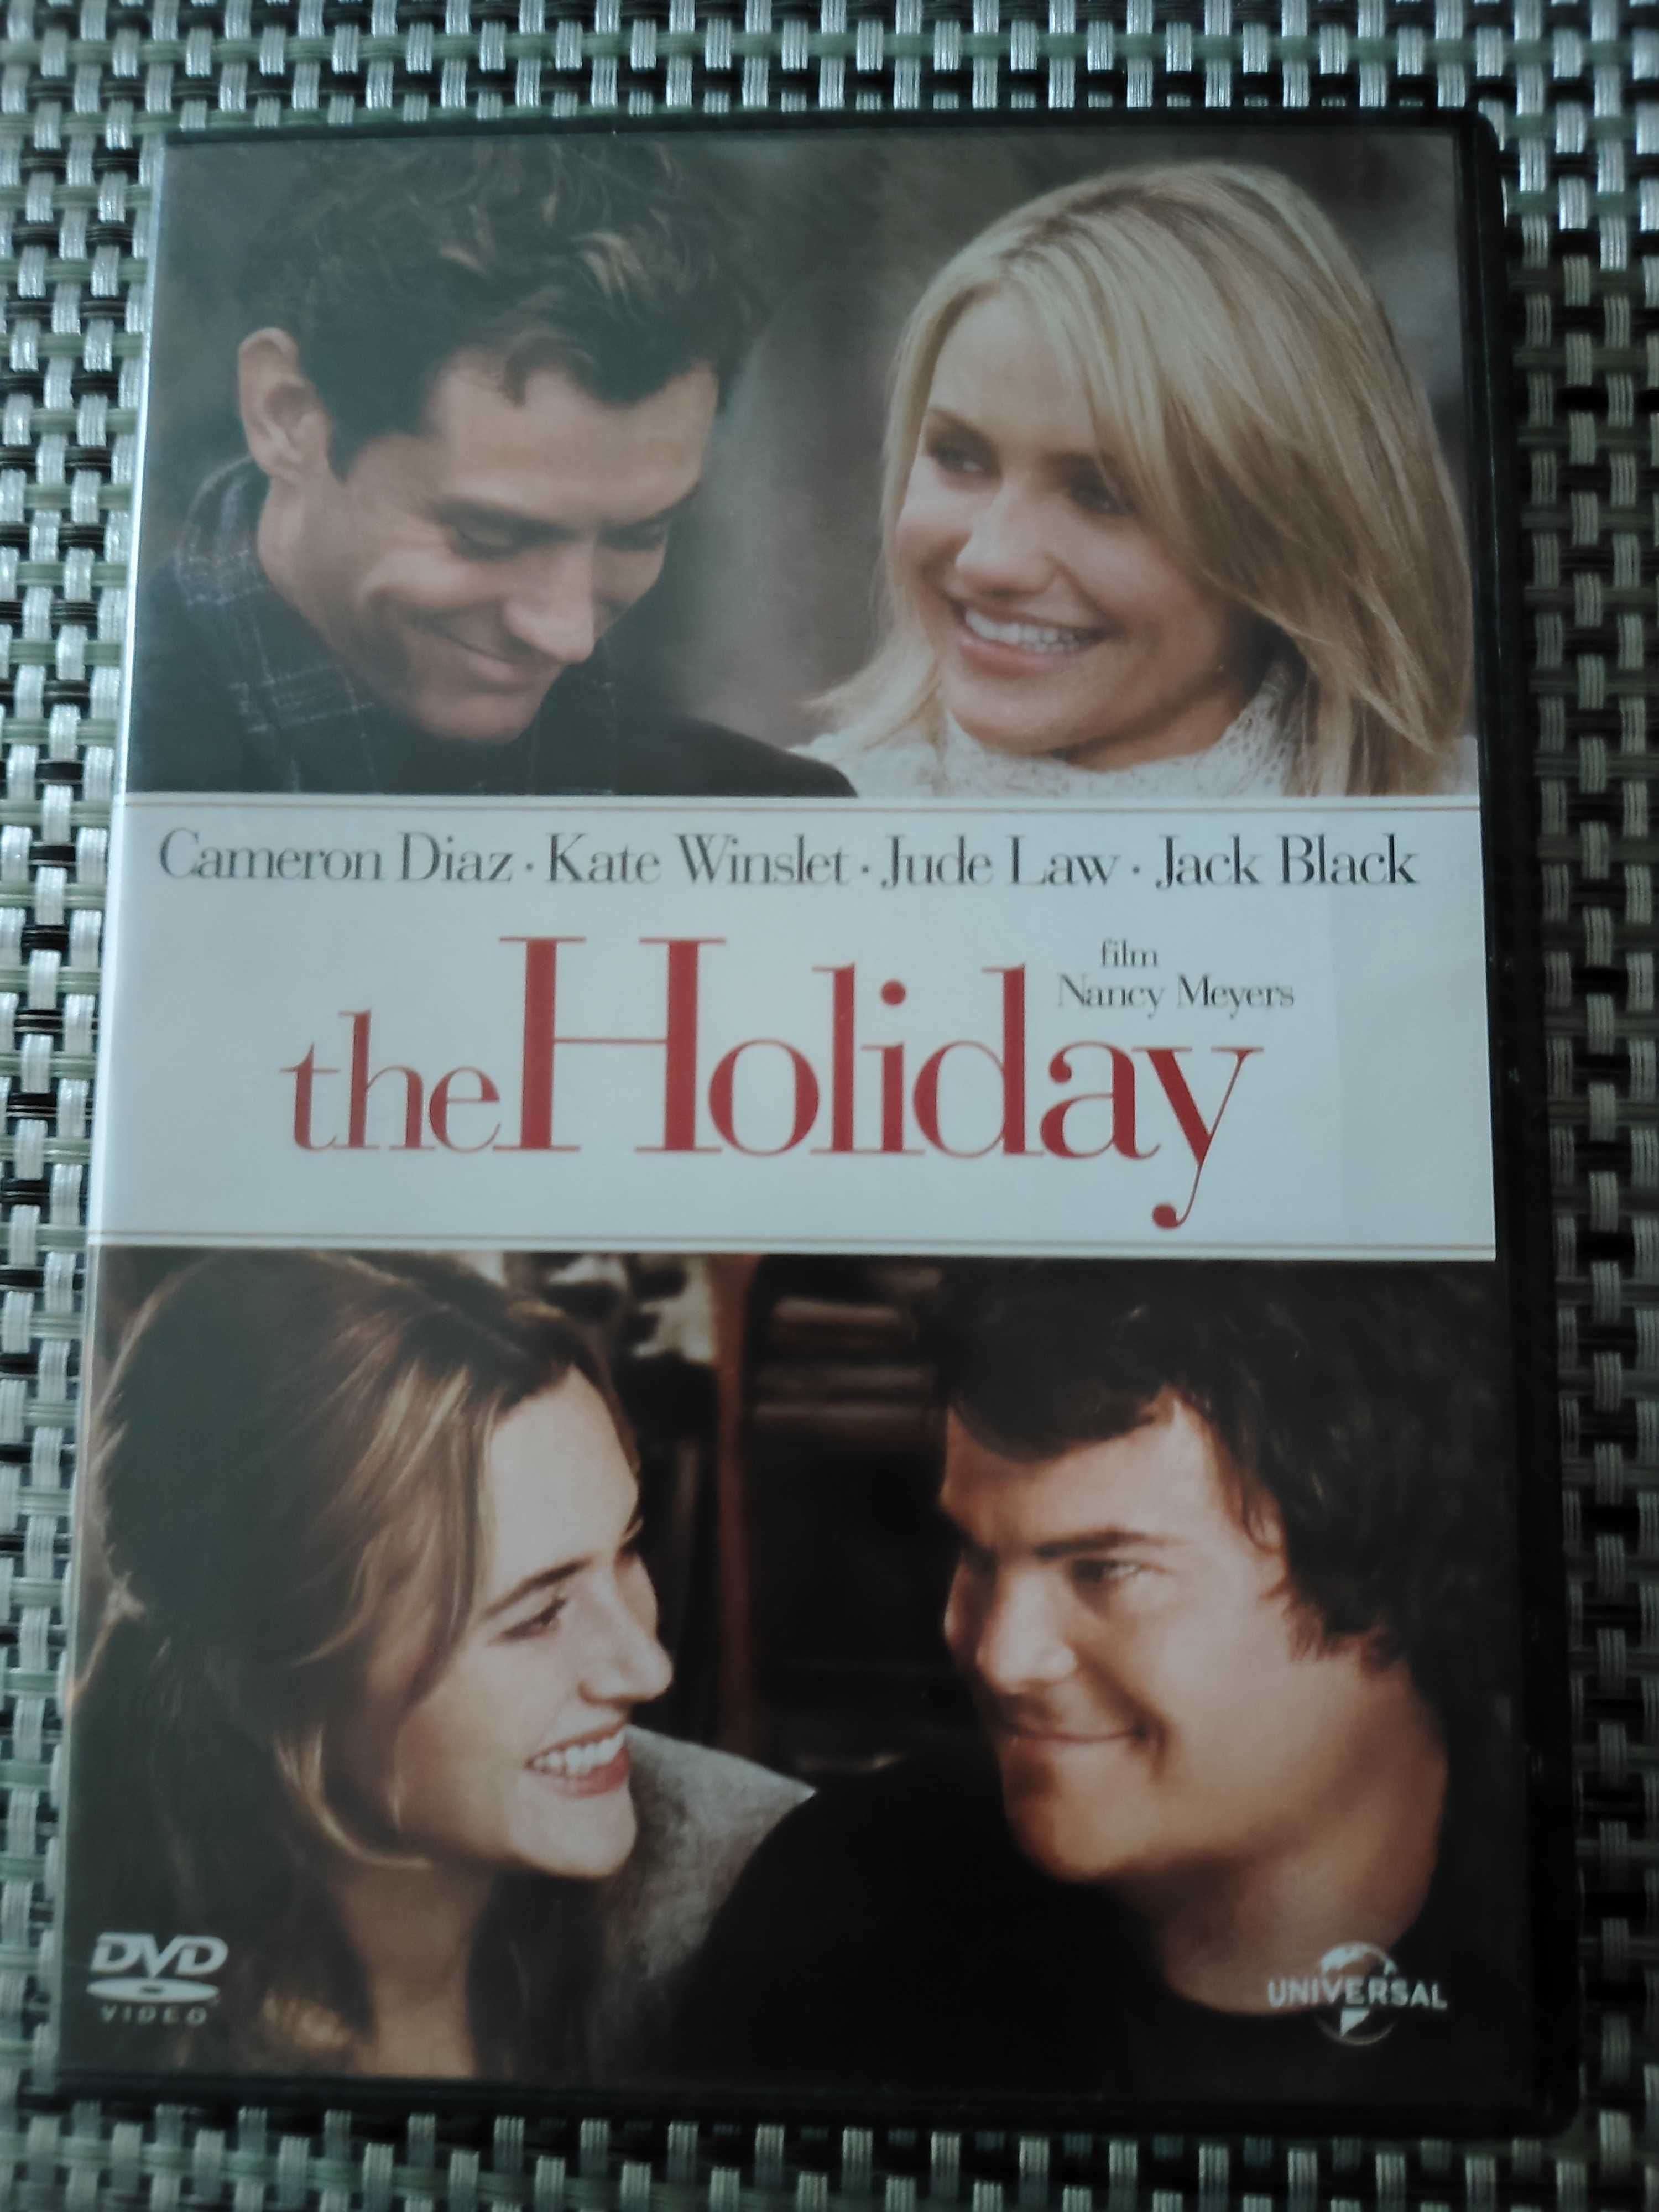 the Holiday dvd.